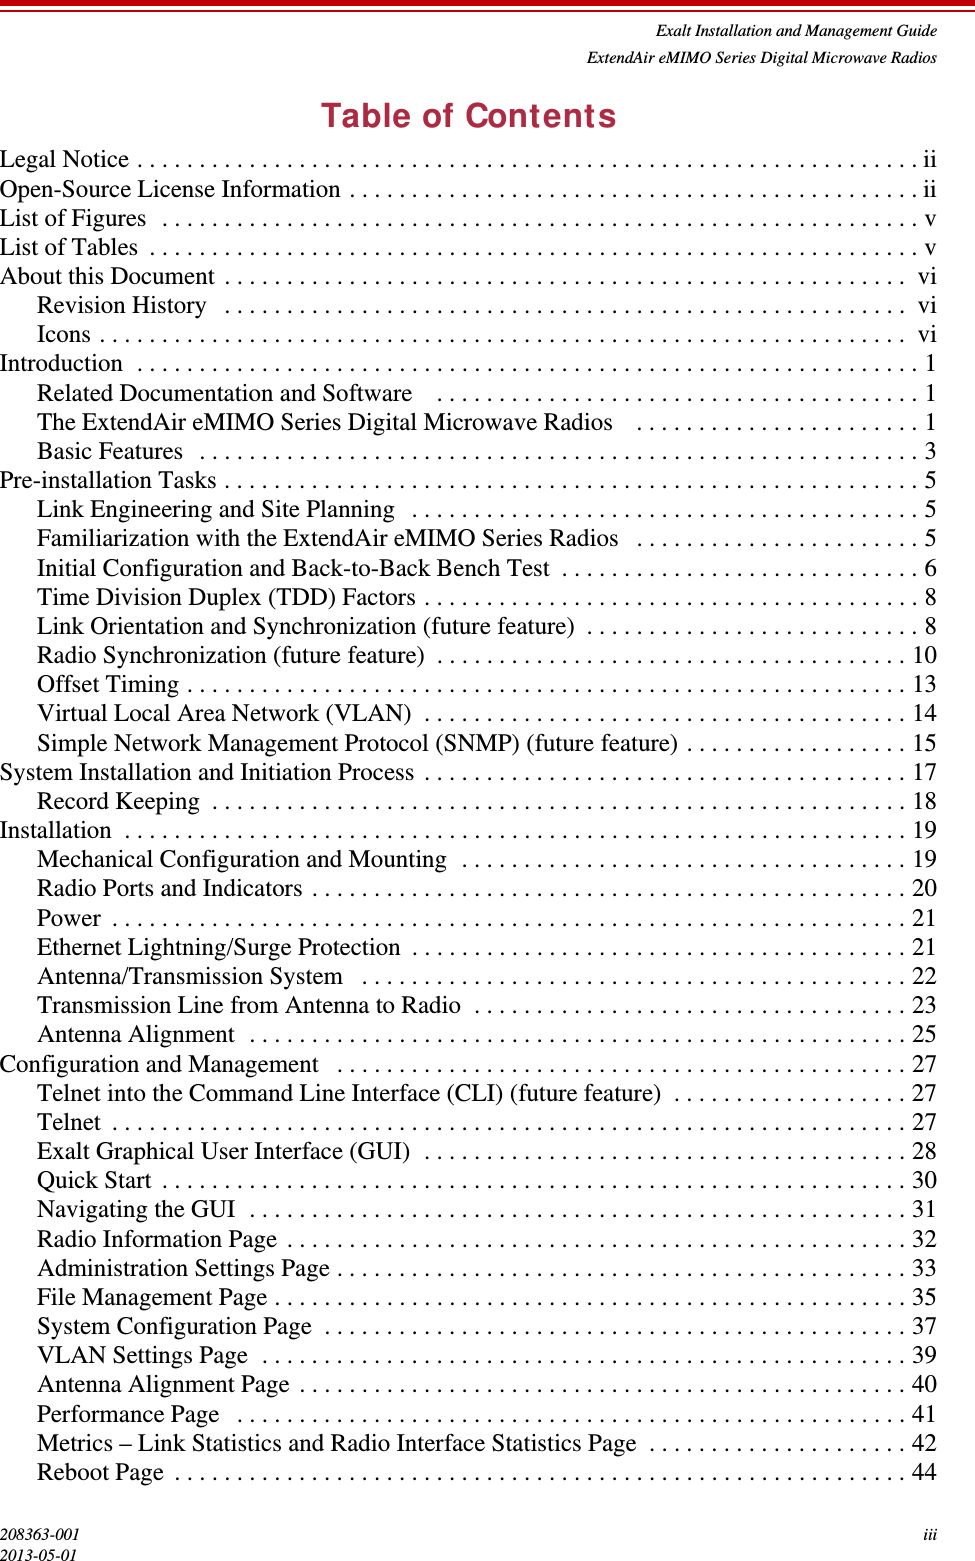 Exalt Installation and Management GuideExtendAir eMIMO Series Digital Microwave Radios208363-001 iii2013-05-01Table of ContentsLegal Notice . . . . . . . . . . . . . . . . . . . . . . . . . . . . . . . . . . . . . . . . . . . . . . . . . . . . . . . . . . . . . . . iiOpen-Source License Information . . . . . . . . . . . . . . . . . . . . . . . . . . . . . . . . . . . . . . . . . . . . . . iiList of Figures  . . . . . . . . . . . . . . . . . . . . . . . . . . . . . . . . . . . . . . . . . . . . . . . . . . . . . . . . . . . . . vList of Tables  . . . . . . . . . . . . . . . . . . . . . . . . . . . . . . . . . . . . . . . . . . . . . . . . . . . . . . . . . . . . . . vAbout this Document . . . . . . . . . . . . . . . . . . . . . . . . . . . . . . . . . . . . . . . . . . . . . . . . . . . . . . .  viRevision History   . . . . . . . . . . . . . . . . . . . . . . . . . . . . . . . . . . . . . . . . . . . . . . . . . . . . . . . viIcons . . . . . . . . . . . . . . . . . . . . . . . . . . . . . . . . . . . . . . . . . . . . . . . . . . . . . . . . . . . . . . . . .  viIntroduction  . . . . . . . . . . . . . . . . . . . . . . . . . . . . . . . . . . . . . . . . . . . . . . . . . . . . . . . . . . . . . . . 1Related Documentation and Software    . . . . . . . . . . . . . . . . . . . . . . . . . . . . . . . . . . . . . . . 1The ExtendAir eMIMO Series Digital Microwave Radios    . . . . . . . . . . . . . . . . . . . . . . . 1Basic Features  . . . . . . . . . . . . . . . . . . . . . . . . . . . . . . . . . . . . . . . . . . . . . . . . . . . . . . . . . . 3Pre-installation Tasks . . . . . . . . . . . . . . . . . . . . . . . . . . . . . . . . . . . . . . . . . . . . . . . . . . . . . . . . 5Link Engineering and Site Planning  . . . . . . . . . . . . . . . . . . . . . . . . . . . . . . . . . . . . . . . . . 5Familiarization with the ExtendAir eMIMO Series Radios   . . . . . . . . . . . . . . . . . . . . . . . 5Initial Configuration and Back-to-Back Bench Test  . . . . . . . . . . . . . . . . . . . . . . . . . . . . . 6Time Division Duplex (TDD) Factors . . . . . . . . . . . . . . . . . . . . . . . . . . . . . . . . . . . . . . . . 8Link Orientation and Synchronization (future feature)  . . . . . . . . . . . . . . . . . . . . . . . . . . . 8Radio Synchronization (future feature)  . . . . . . . . . . . . . . . . . . . . . . . . . . . . . . . . . . . . . . 10Offset Timing . . . . . . . . . . . . . . . . . . . . . . . . . . . . . . . . . . . . . . . . . . . . . . . . . . . . . . . . . . 13Virtual Local Area Network (VLAN)  . . . . . . . . . . . . . . . . . . . . . . . . . . . . . . . . . . . . . . . 14Simple Network Management Protocol (SNMP) (future feature) . . . . . . . . . . . . . . . . . . 15System Installation and Initiation Process . . . . . . . . . . . . . . . . . . . . . . . . . . . . . . . . . . . . . . . 17Record Keeping  . . . . . . . . . . . . . . . . . . . . . . . . . . . . . . . . . . . . . . . . . . . . . . . . . . . . . . . . 18Installation  . . . . . . . . . . . . . . . . . . . . . . . . . . . . . . . . . . . . . . . . . . . . . . . . . . . . . . . . . . . . . . . 19Mechanical Configuration and Mounting  . . . . . . . . . . . . . . . . . . . . . . . . . . . . . . . . . . . . 19Radio Ports and Indicators . . . . . . . . . . . . . . . . . . . . . . . . . . . . . . . . . . . . . . . . . . . . . . . . 20Power  . . . . . . . . . . . . . . . . . . . . . . . . . . . . . . . . . . . . . . . . . . . . . . . . . . . . . . . . . . . . . . . . 21Ethernet Lightning/Surge Protection  . . . . . . . . . . . . . . . . . . . . . . . . . . . . . . . . . . . . . . . . 21Antenna/Transmission System   . . . . . . . . . . . . . . . . . . . . . . . . . . . . . . . . . . . . . . . . . . . . 22Transmission Line from Antenna to Radio  . . . . . . . . . . . . . . . . . . . . . . . . . . . . . . . . . . . 23Antenna Alignment  . . . . . . . . . . . . . . . . . . . . . . . . . . . . . . . . . . . . . . . . . . . . . . . . . . . . . 25Configuration and Management   . . . . . . . . . . . . . . . . . . . . . . . . . . . . . . . . . . . . . . . . . . . . . . 27Telnet into the Command Line Interface (CLI) (future feature)  . . . . . . . . . . . . . . . . . . . 27Telnet  . . . . . . . . . . . . . . . . . . . . . . . . . . . . . . . . . . . . . . . . . . . . . . . . . . . . . . . . . . . . . . . . 27Exalt Graphical User Interface (GUI)  . . . . . . . . . . . . . . . . . . . . . . . . . . . . . . . . . . . . . . . 28Quick Start . . . . . . . . . . . . . . . . . . . . . . . . . . . . . . . . . . . . . . . . . . . . . . . . . . . . . . . . . . . . 30Navigating the GUI  . . . . . . . . . . . . . . . . . . . . . . . . . . . . . . . . . . . . . . . . . . . . . . . . . . . . . 31Radio Information Page . . . . . . . . . . . . . . . . . . . . . . . . . . . . . . . . . . . . . . . . . . . . . . . . . . 32Administration Settings Page . . . . . . . . . . . . . . . . . . . . . . . . . . . . . . . . . . . . . . . . . . . . . . 33File Management Page . . . . . . . . . . . . . . . . . . . . . . . . . . . . . . . . . . . . . . . . . . . . . . . . . . . 35System Configuration Page  . . . . . . . . . . . . . . . . . . . . . . . . . . . . . . . . . . . . . . . . . . . . . . . 37VLAN Settings Page  . . . . . . . . . . . . . . . . . . . . . . . . . . . . . . . . . . . . . . . . . . . . . . . . . . . . 39Antenna Alignment Page . . . . . . . . . . . . . . . . . . . . . . . . . . . . . . . . . . . . . . . . . . . . . . . . . 40Performance Page   . . . . . . . . . . . . . . . . . . . . . . . . . . . . . . . . . . . . . . . . . . . . . . . . . . . . . . 41Metrics – Link Statistics and Radio Interface Statistics Page  . . . . . . . . . . . . . . . . . . . . . 42Reboot Page . . . . . . . . . . . . . . . . . . . . . . . . . . . . . . . . . . . . . . . . . . . . . . . . . . . . . . . . . . . 44